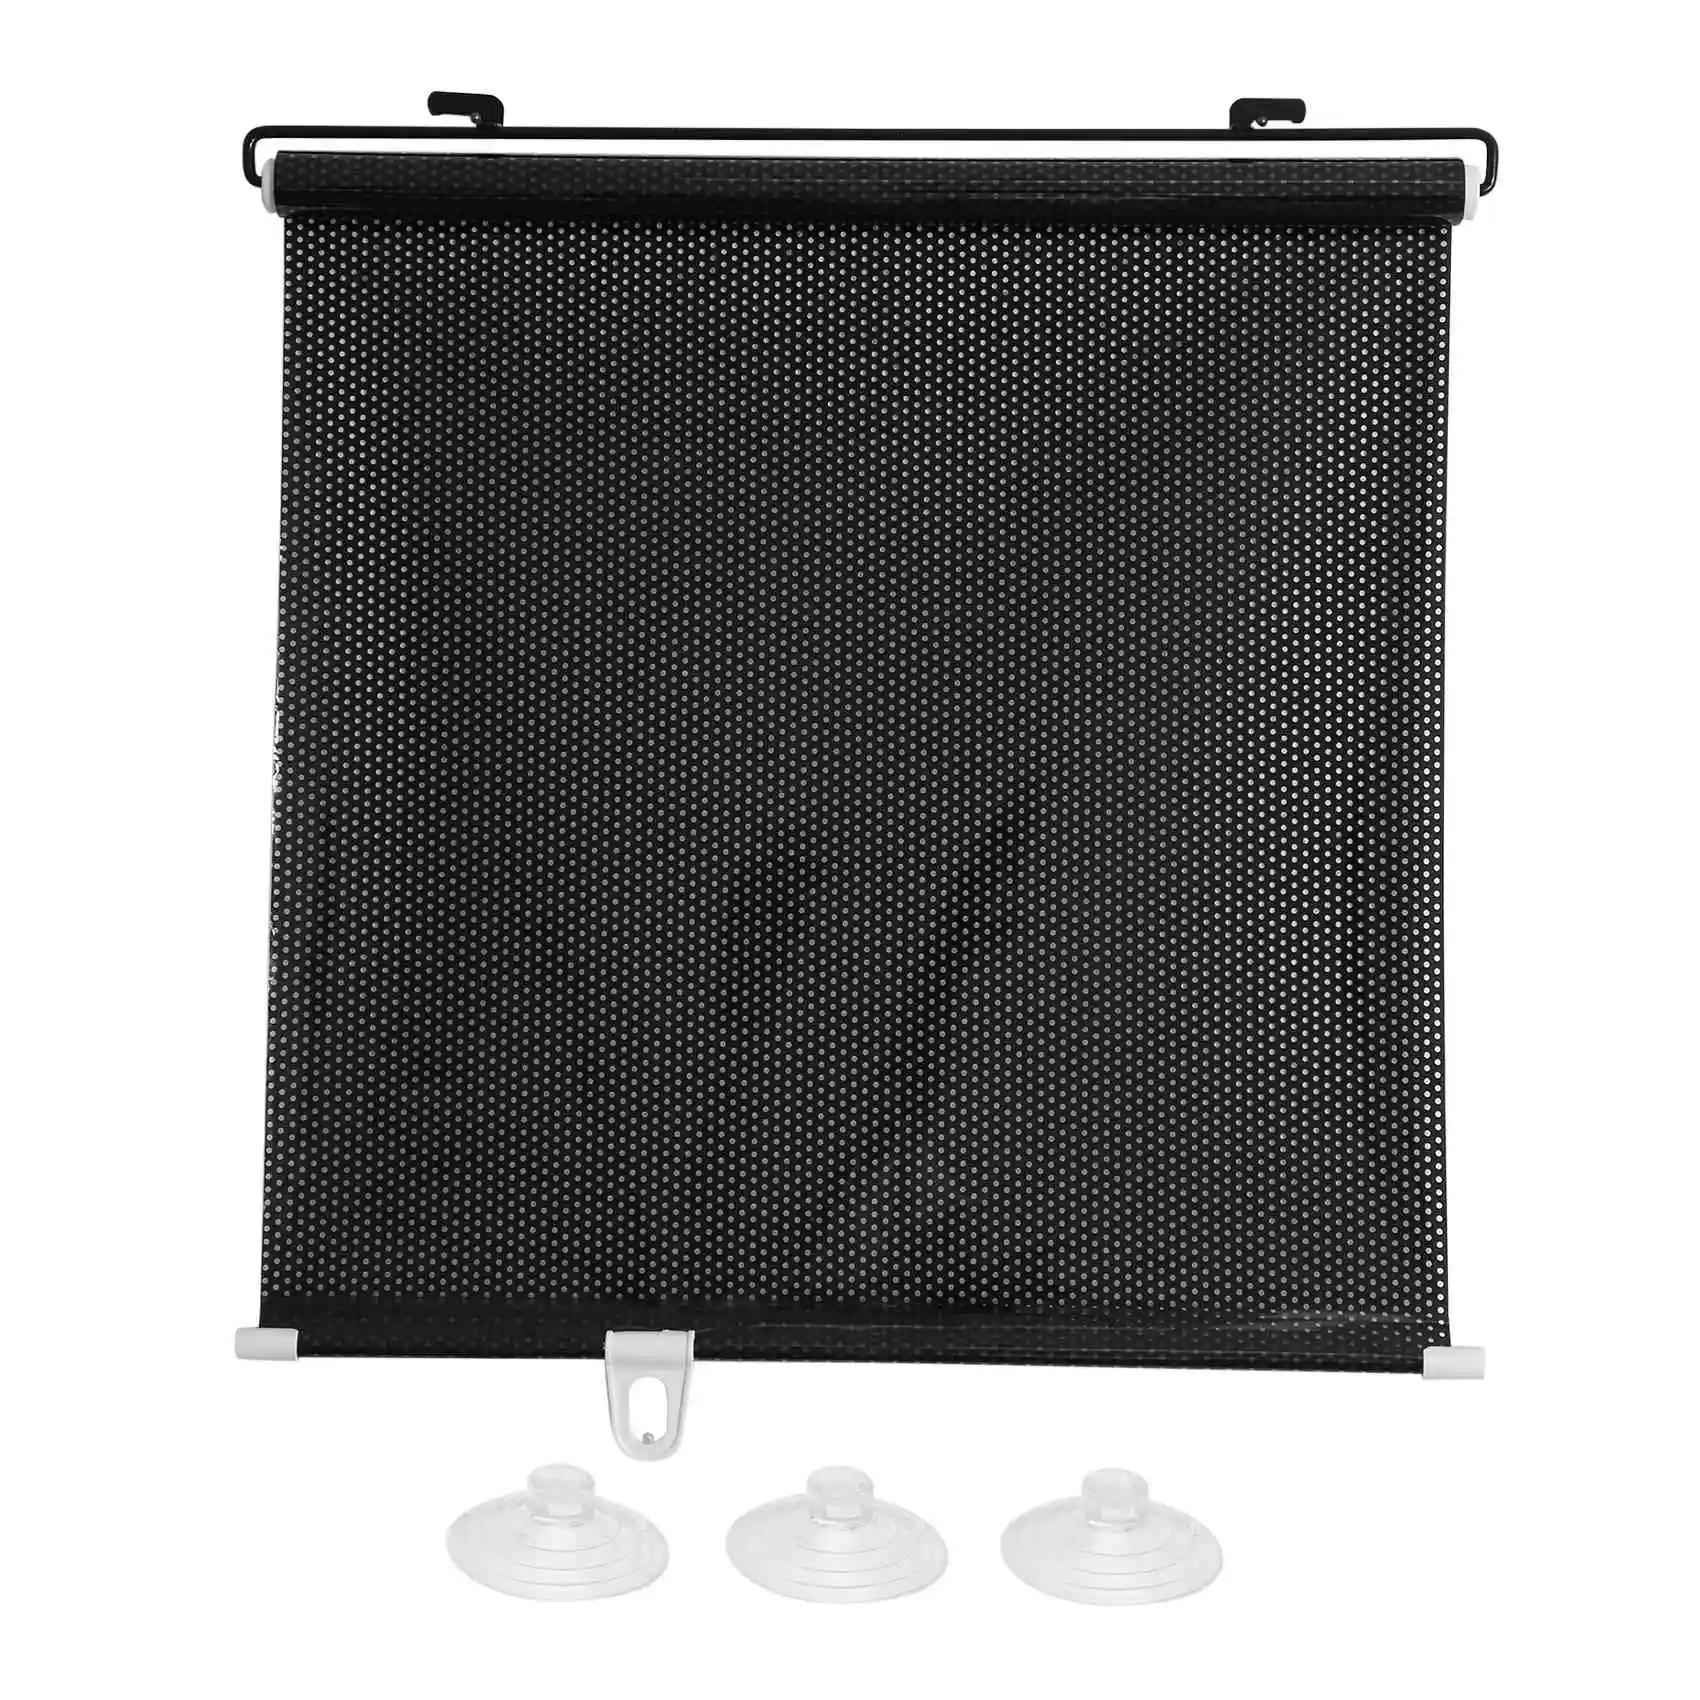 

Sunshade Roller Blackout Suction Cup Blinds Curtains for Living Kitchen Office Car Window Free-Perforated Curtain A